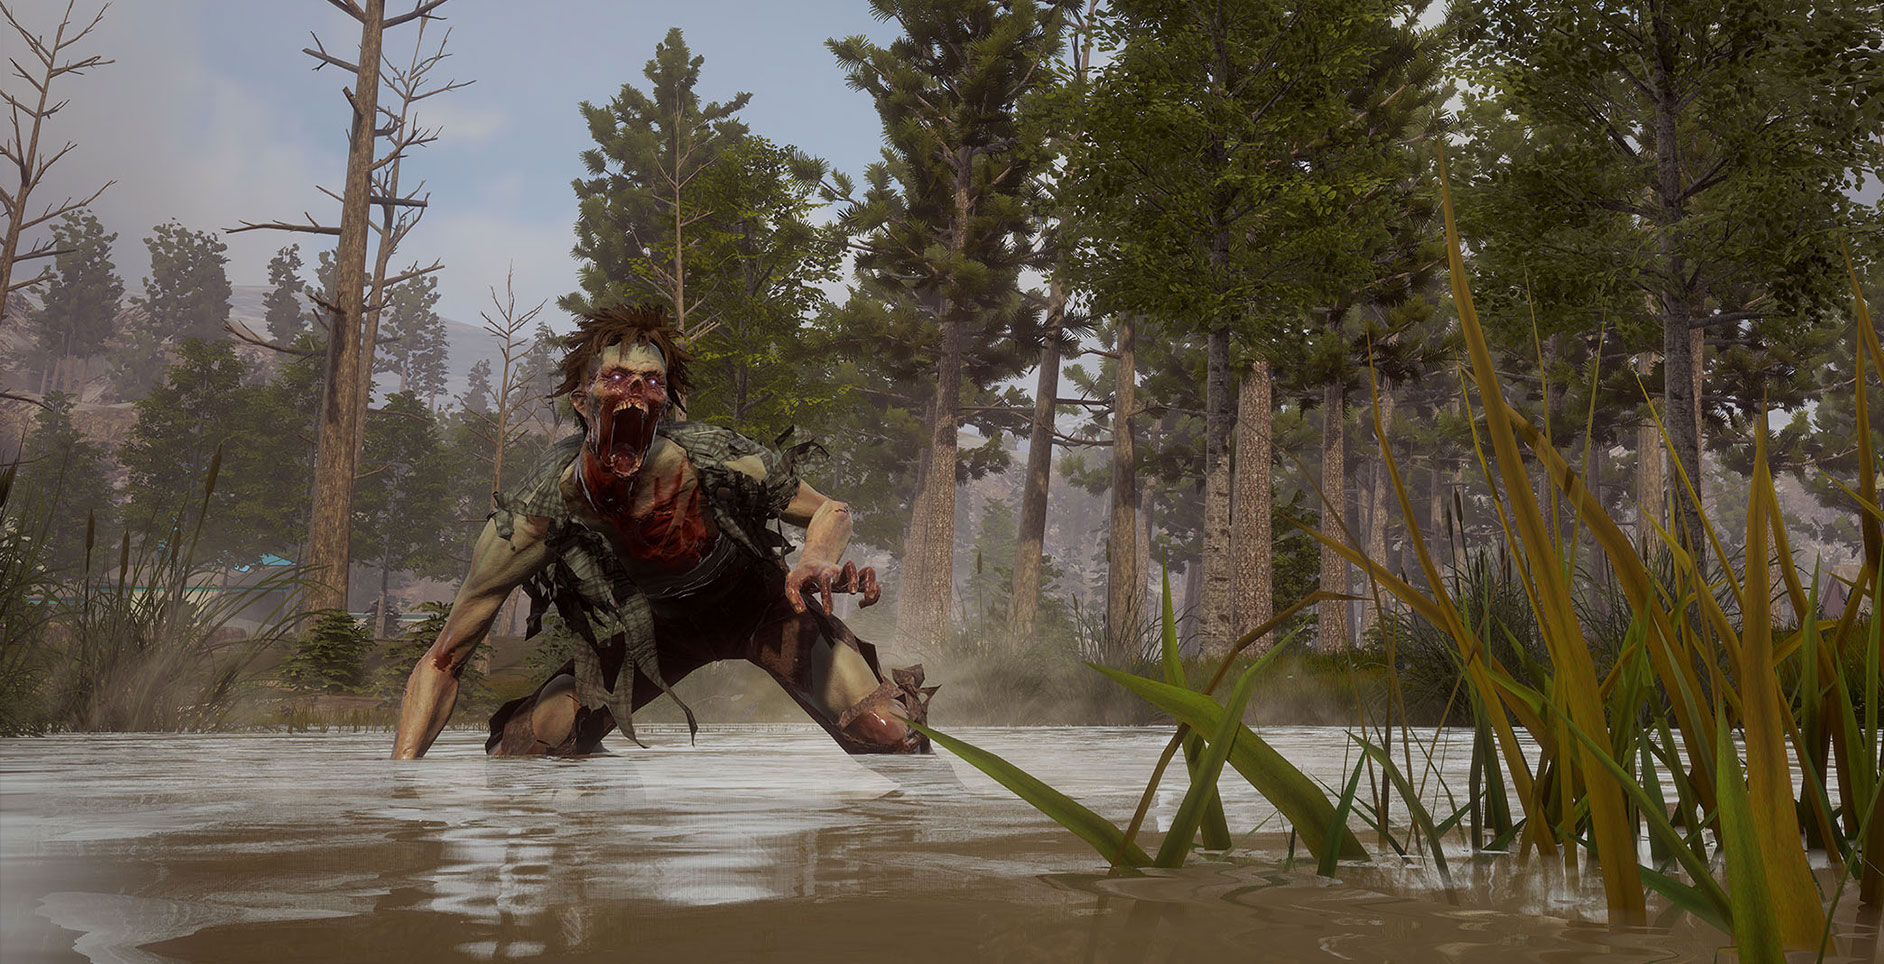 State of Decay 2 fully simulates the world of the undead